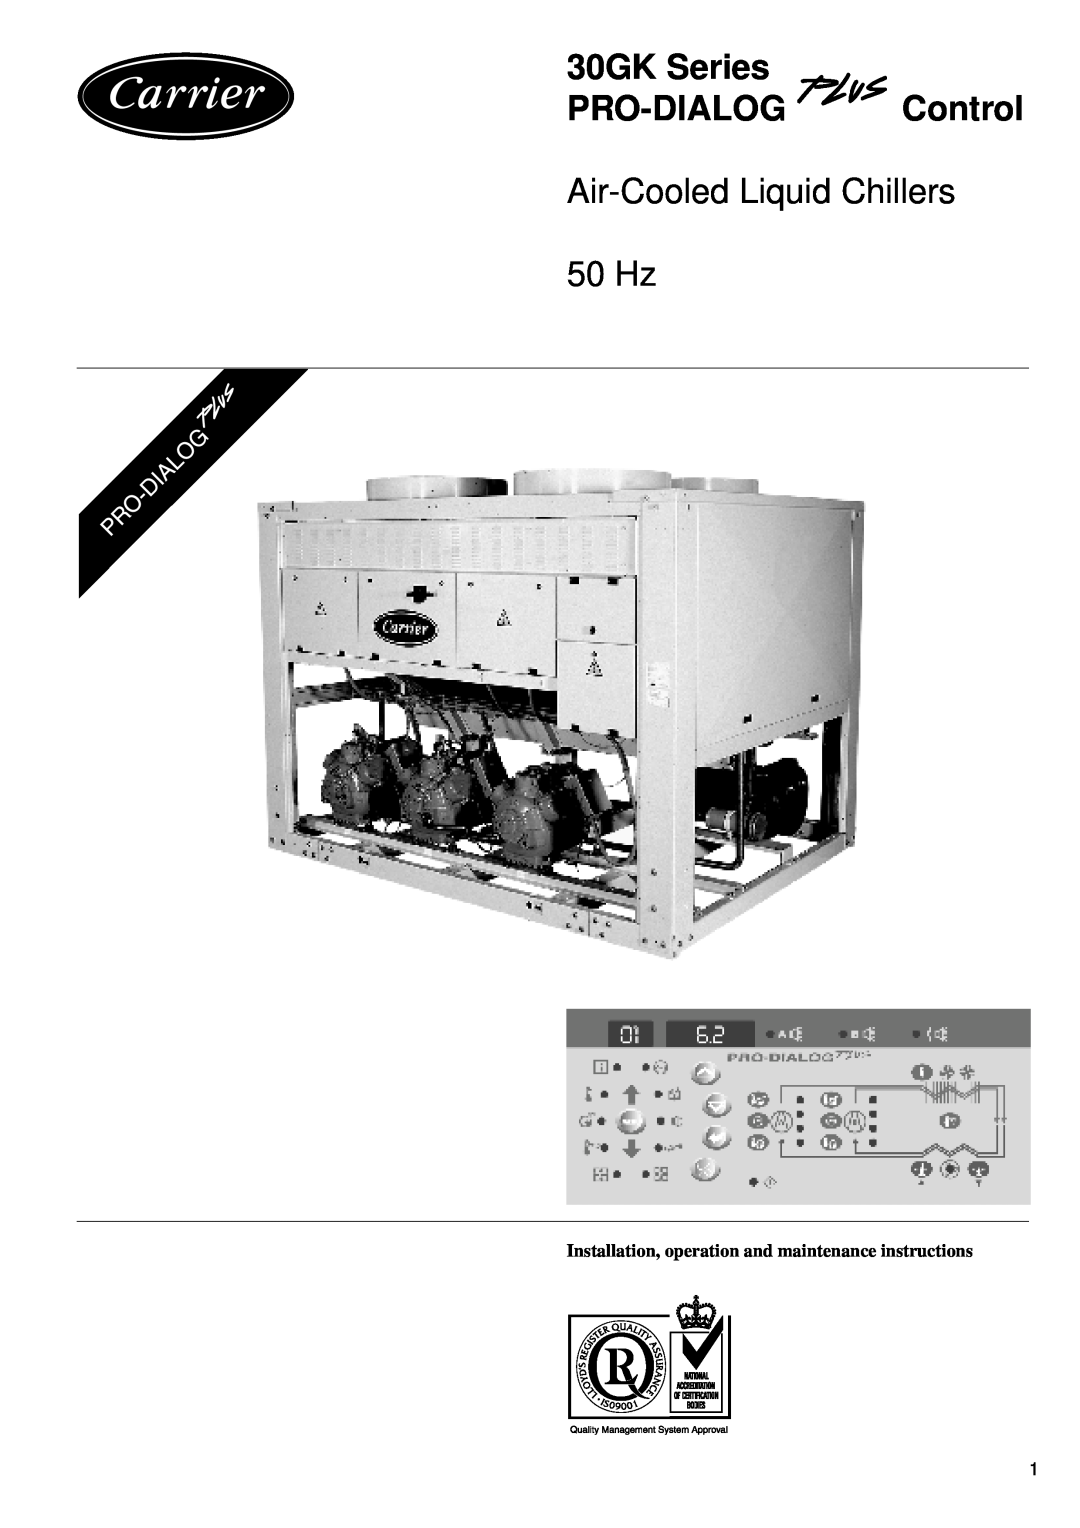 Carrier manual Installation, operation and maintenance instructions, 30GK Series PRO-DIALOG Control 